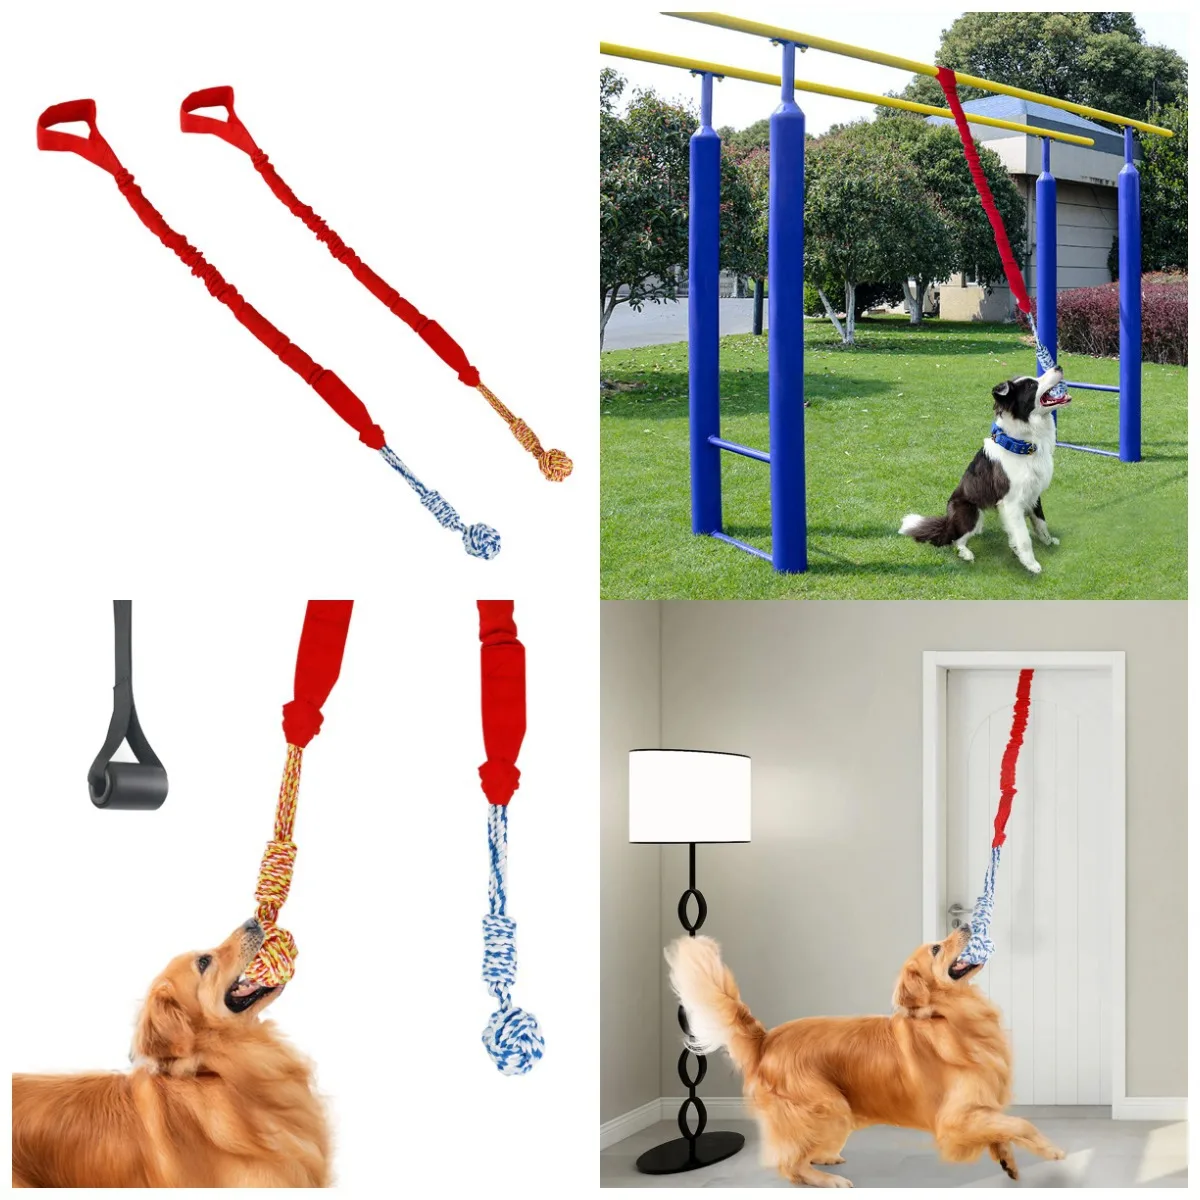 

Dog Chew Hang Toy Bite Resistant Rope Knot Pet Large Dogs To Relieve Boredom Teeth Grinding and Cleaning Pet Training Supplies